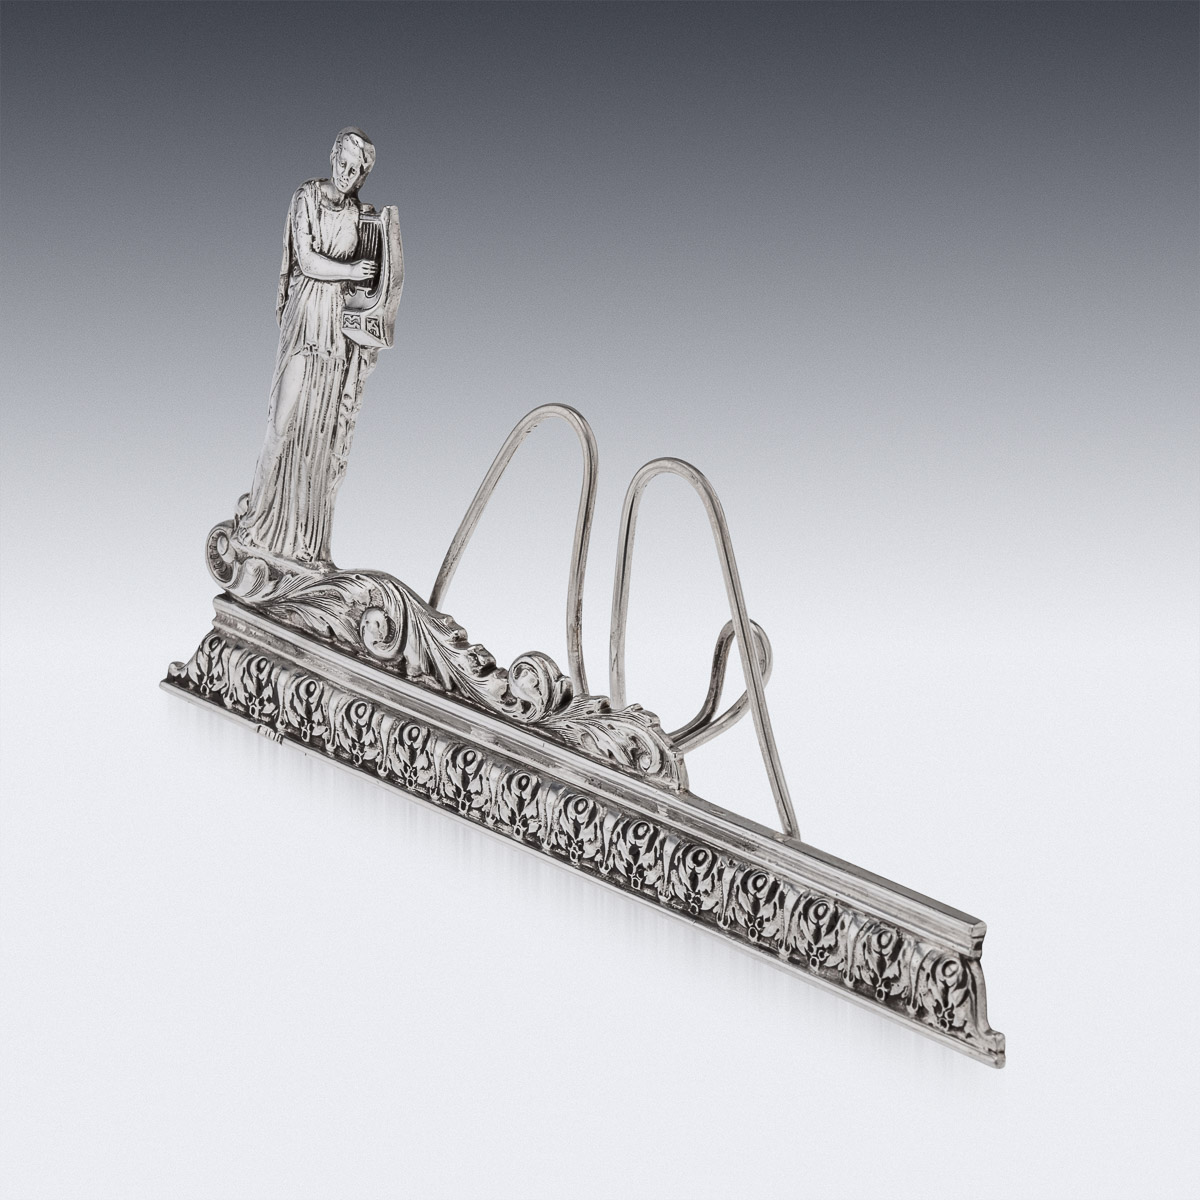 A PAIR OF STERLING SILVER MUSIC SHEET STANDS, CARRINGTON & CO. C. 1910 - Image 8 of 16